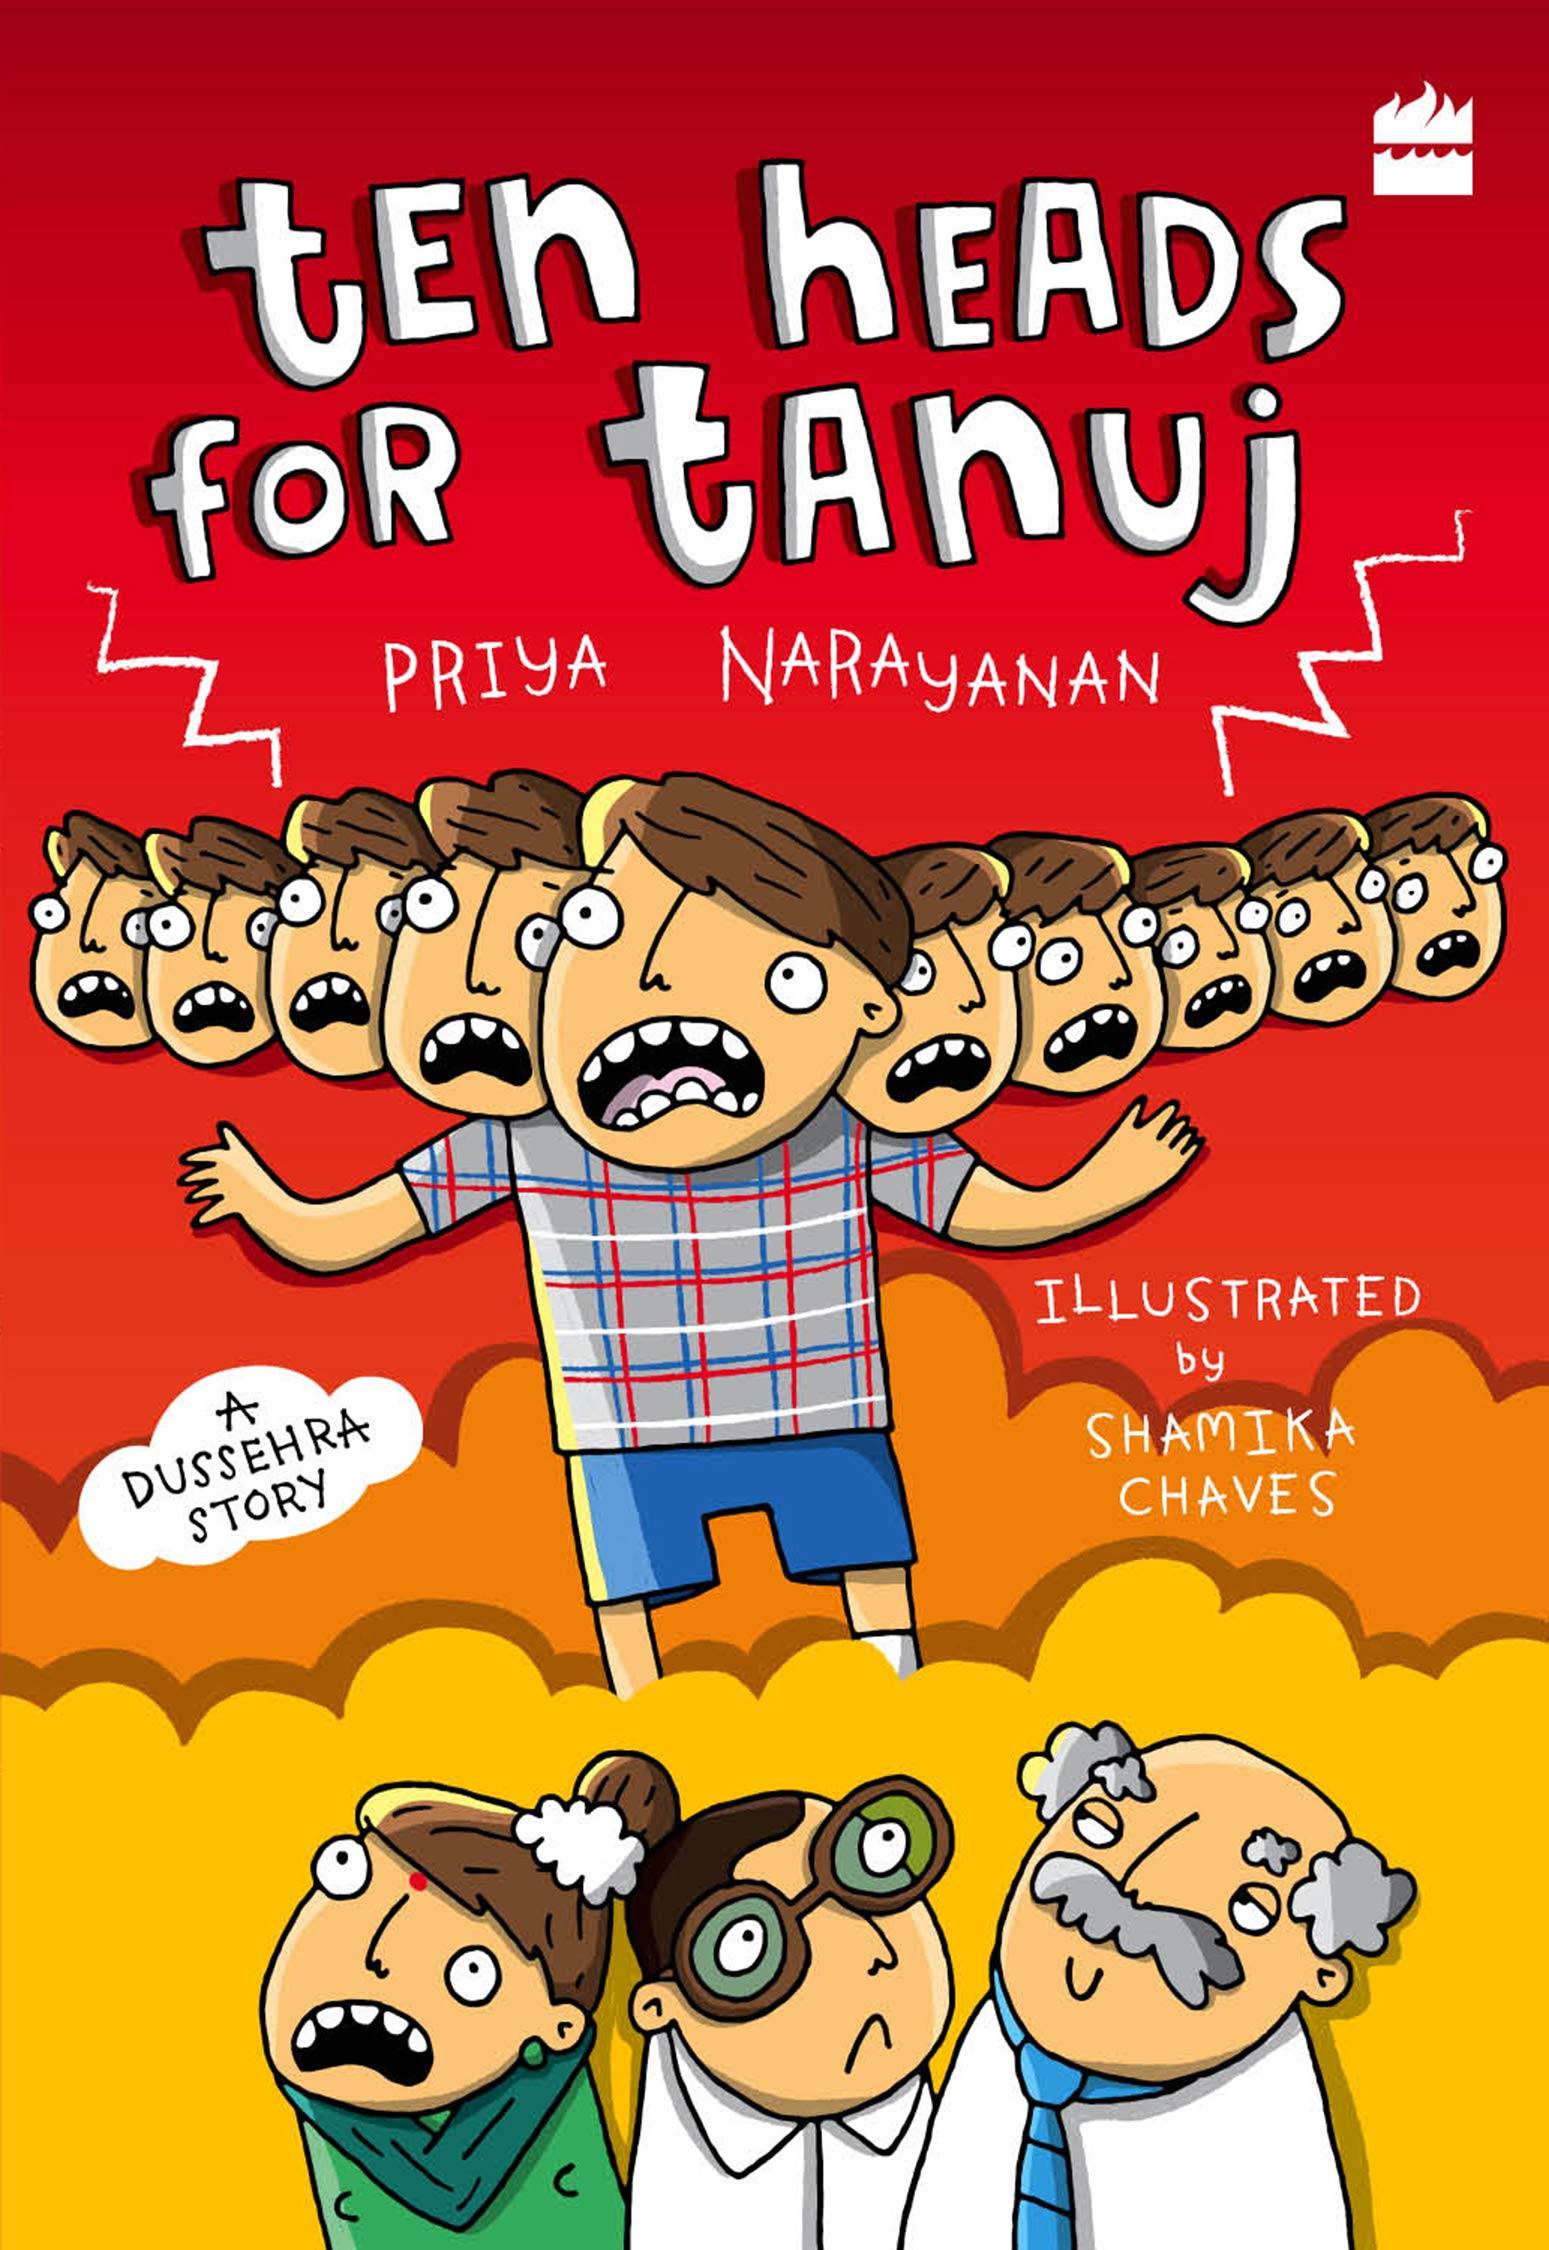 IMG : Ten heads for Tanuj